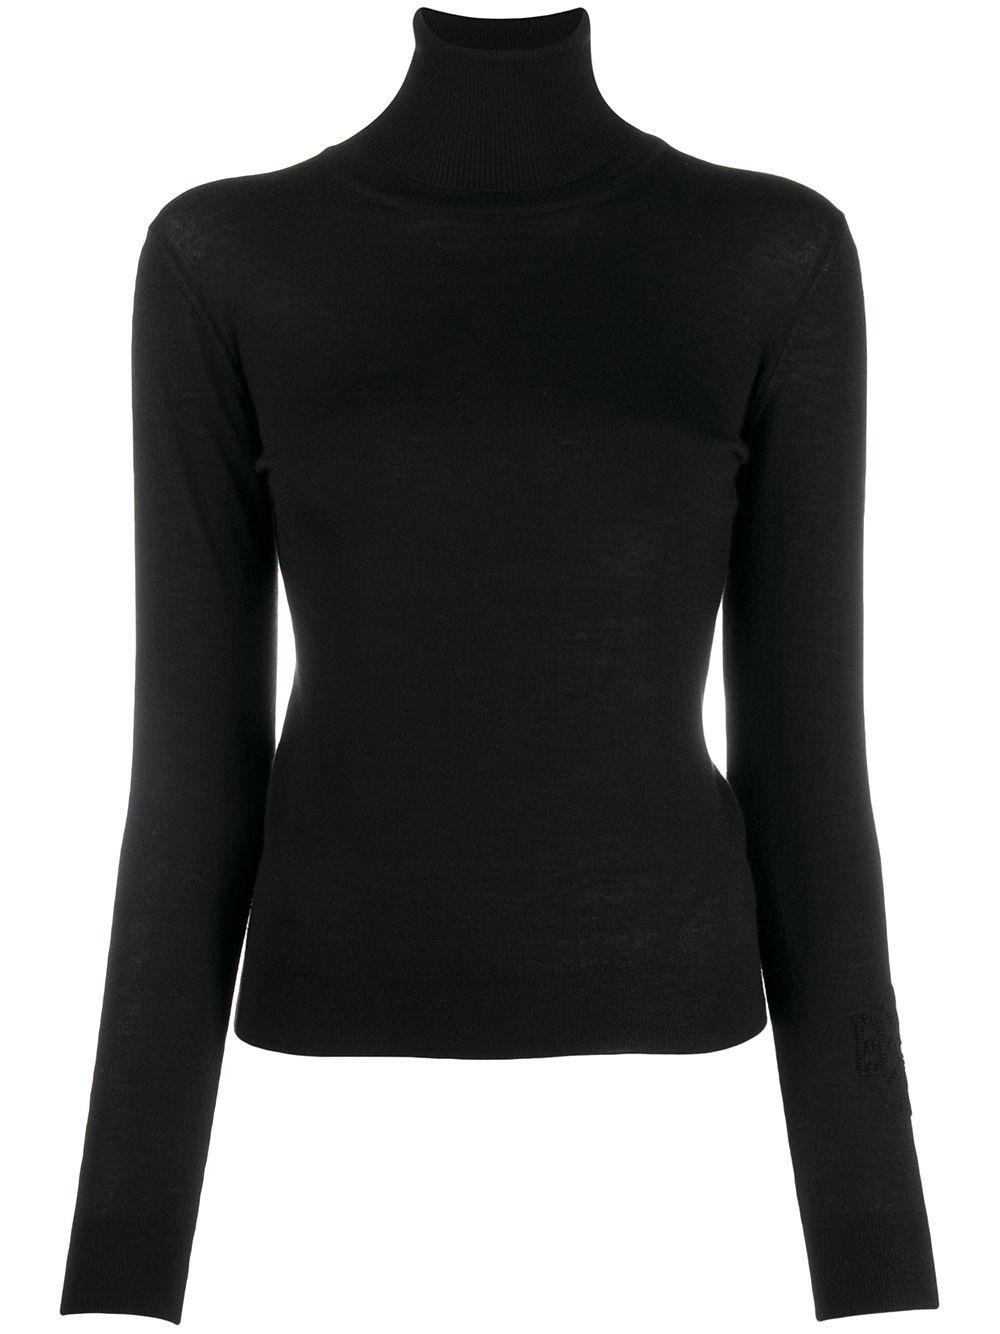 Turtleneck cashmere pullover by BARRIE